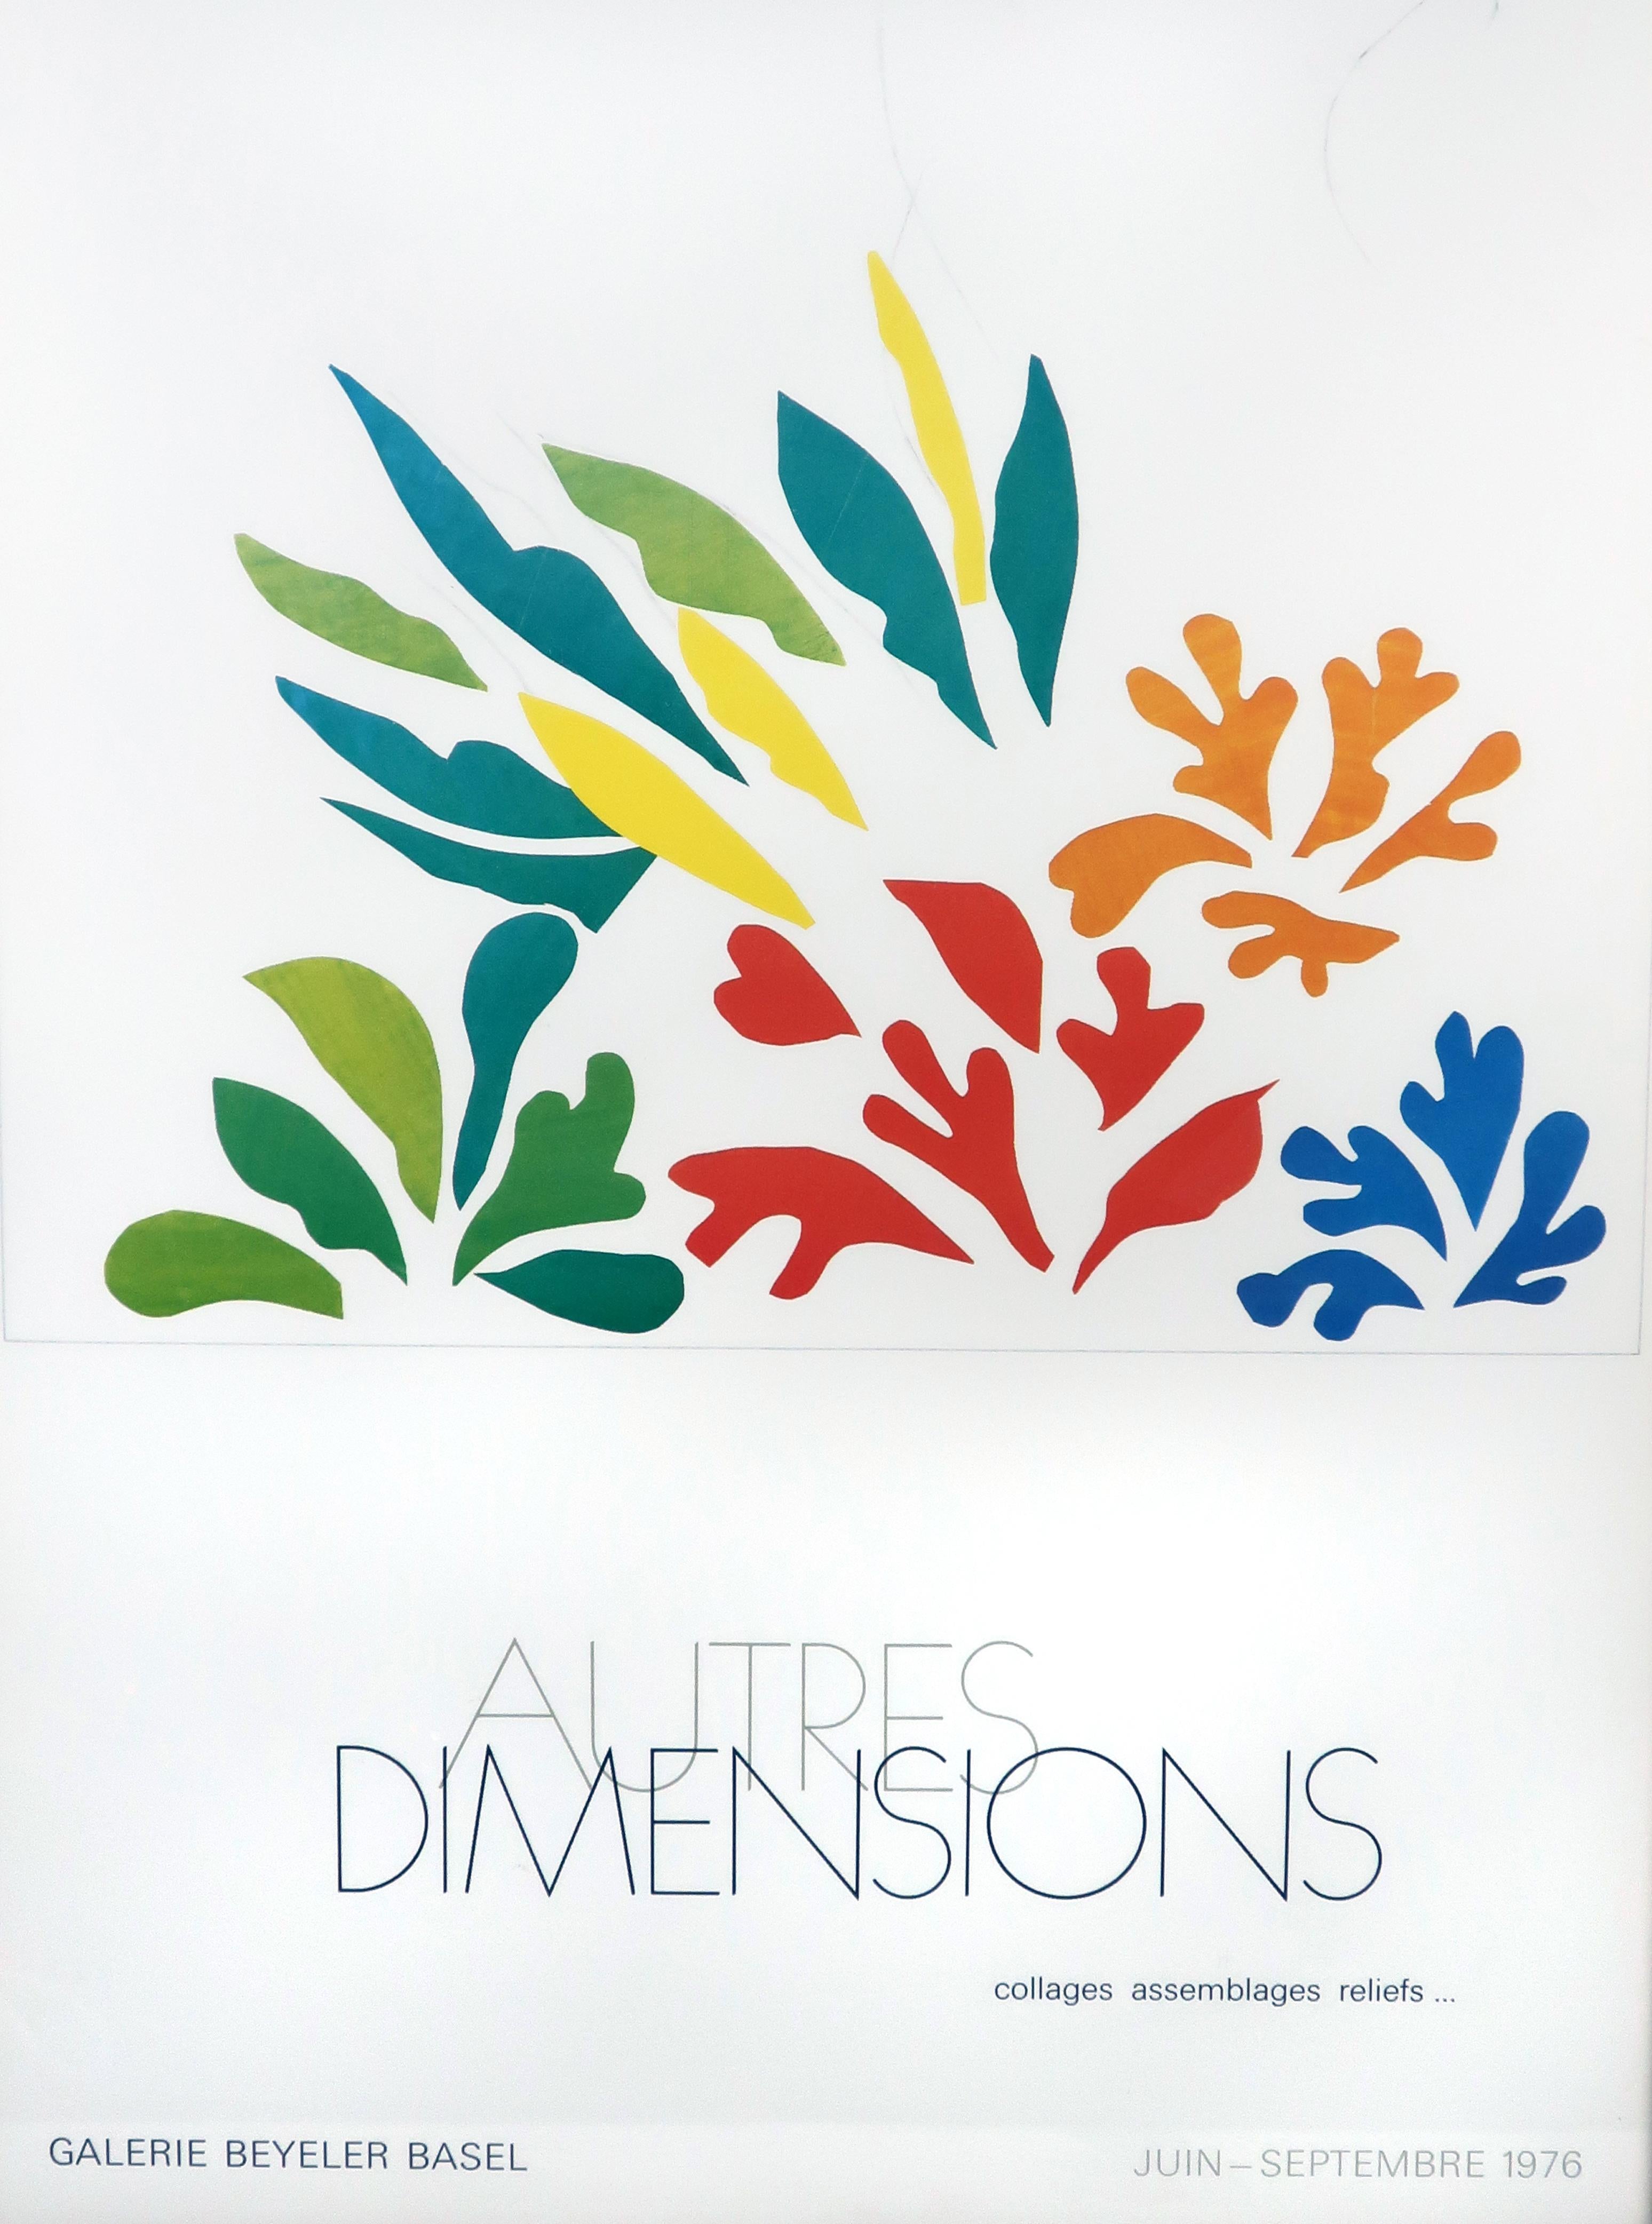 A framed poster from the Autres Dimensions exhibition at Galerie Beyeler Basel that ran June-Sept 1976. Included “collages, assemblages, reliefs” by a huge range of artists, including Arp, Antes, Braque, Dine, Christo, Klee, Krasner, Lichtenstein,